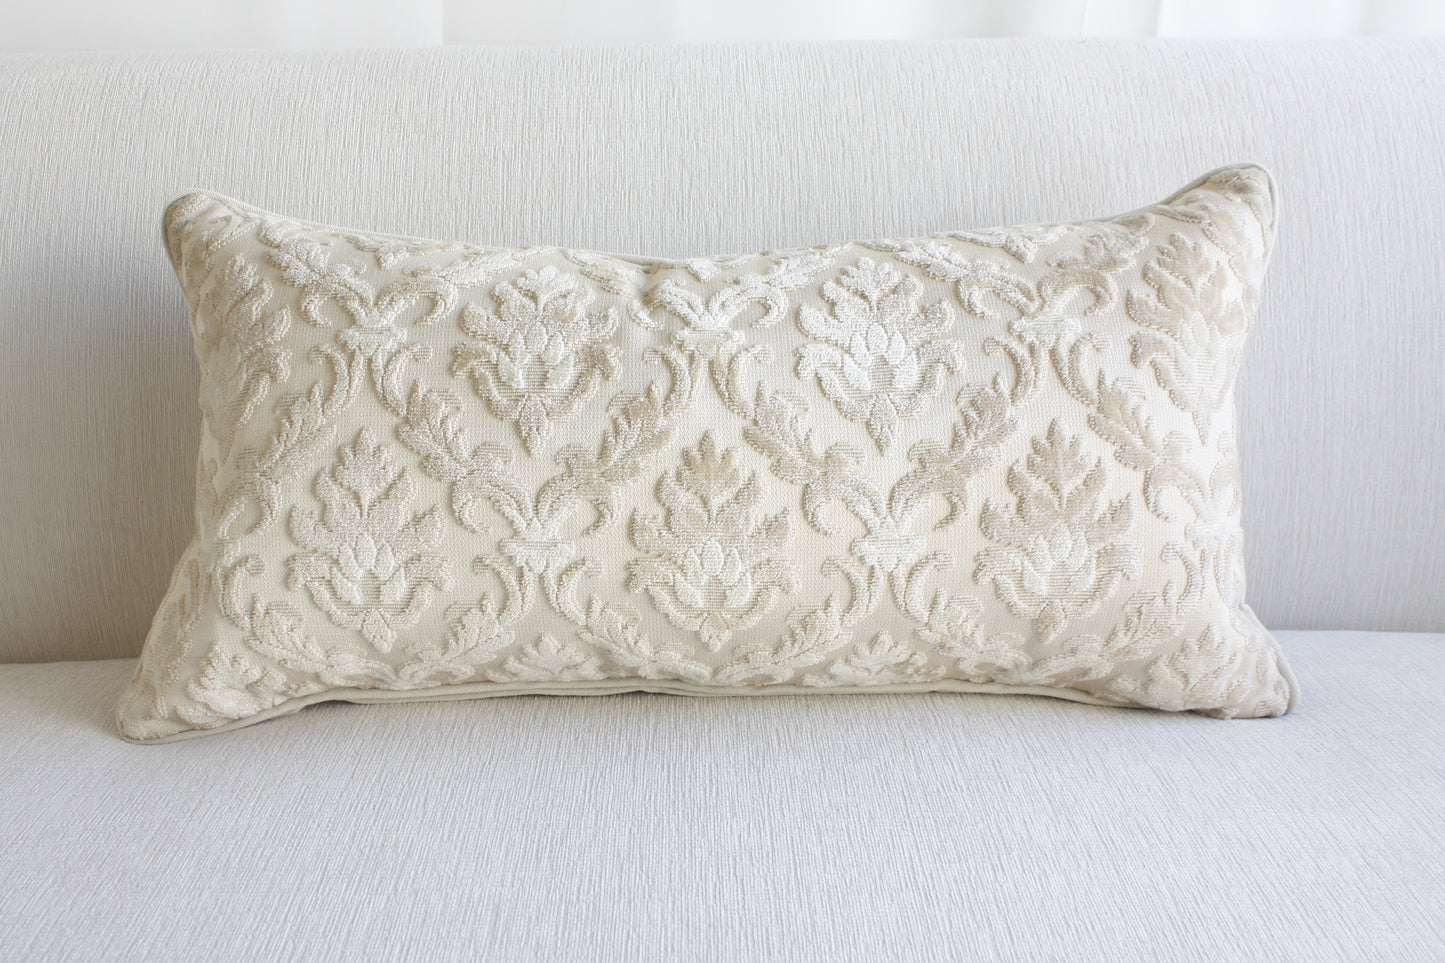 Early 1910 Pillow with Raised Floral Pattern